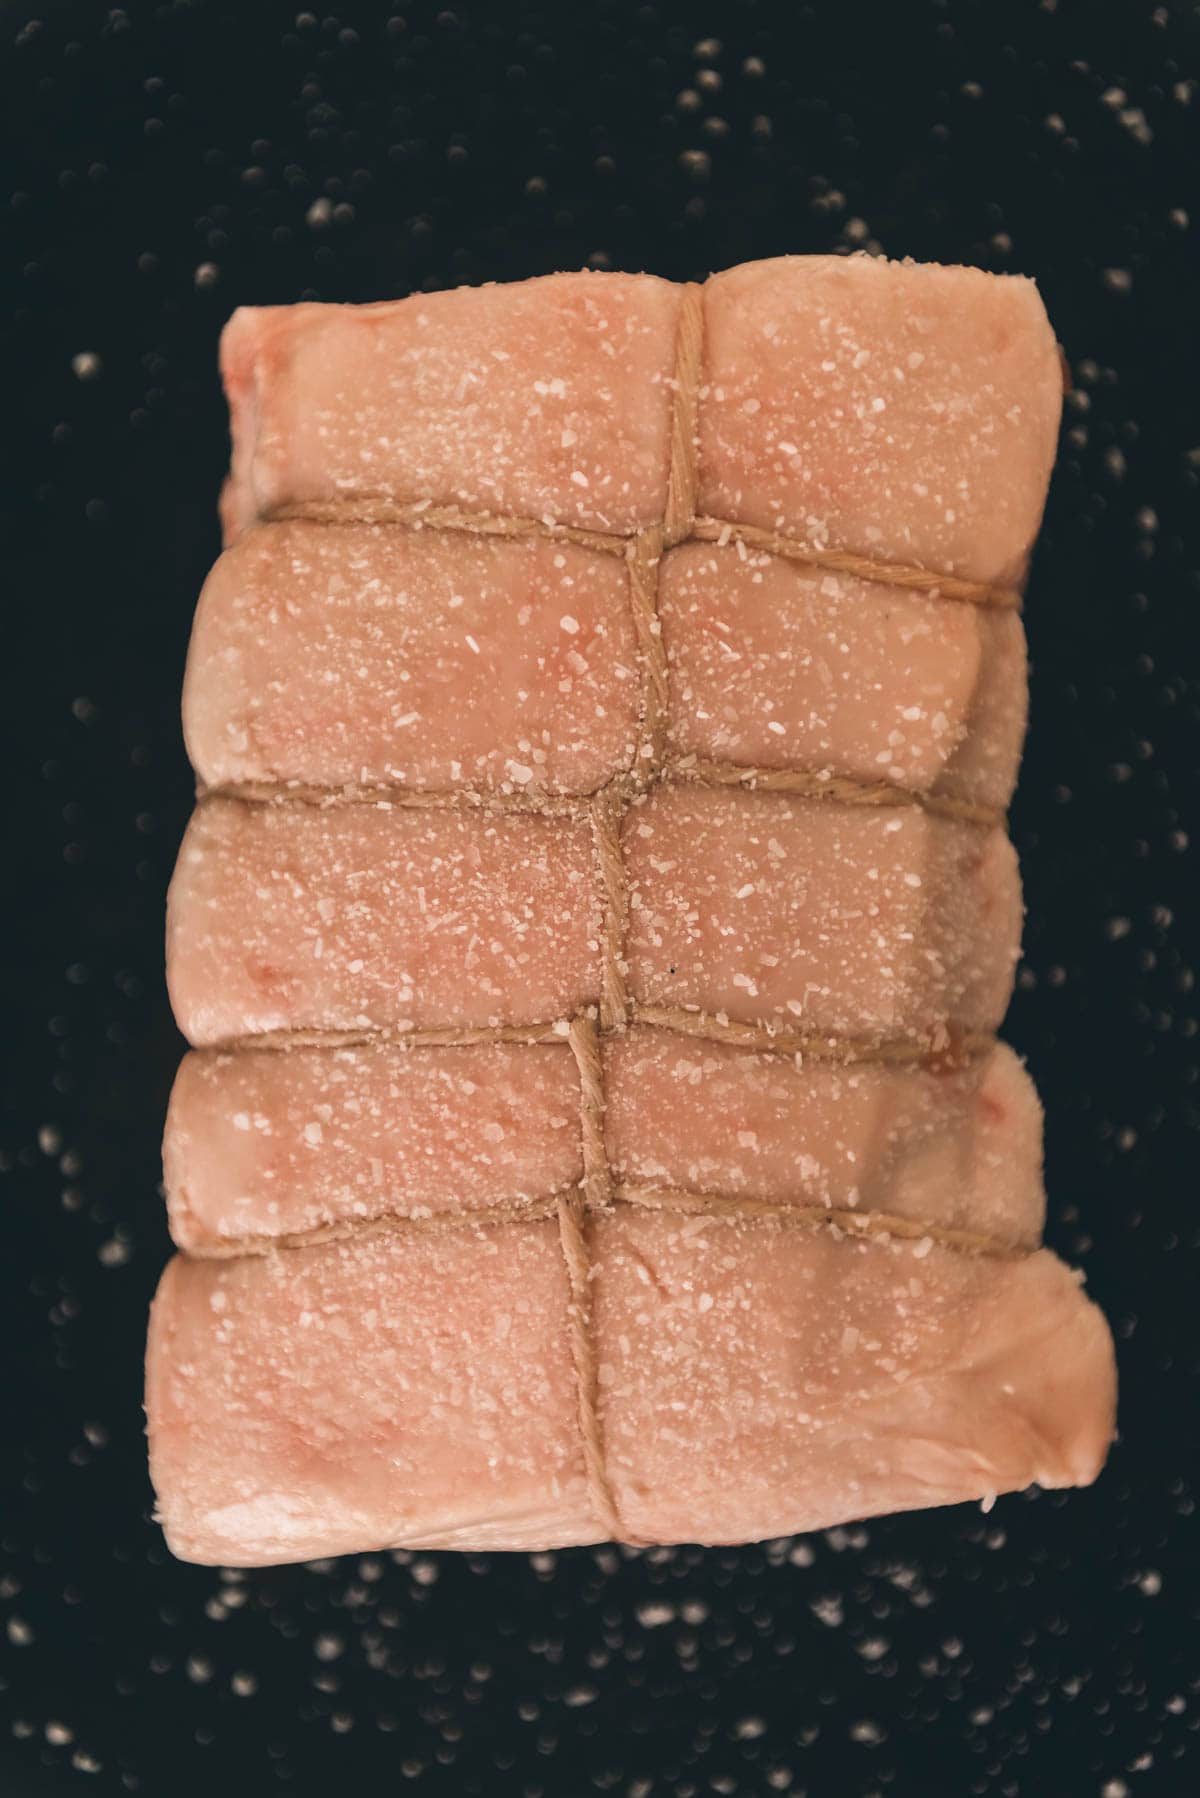 A close up of a piece of pork thats been salted on a black surface.